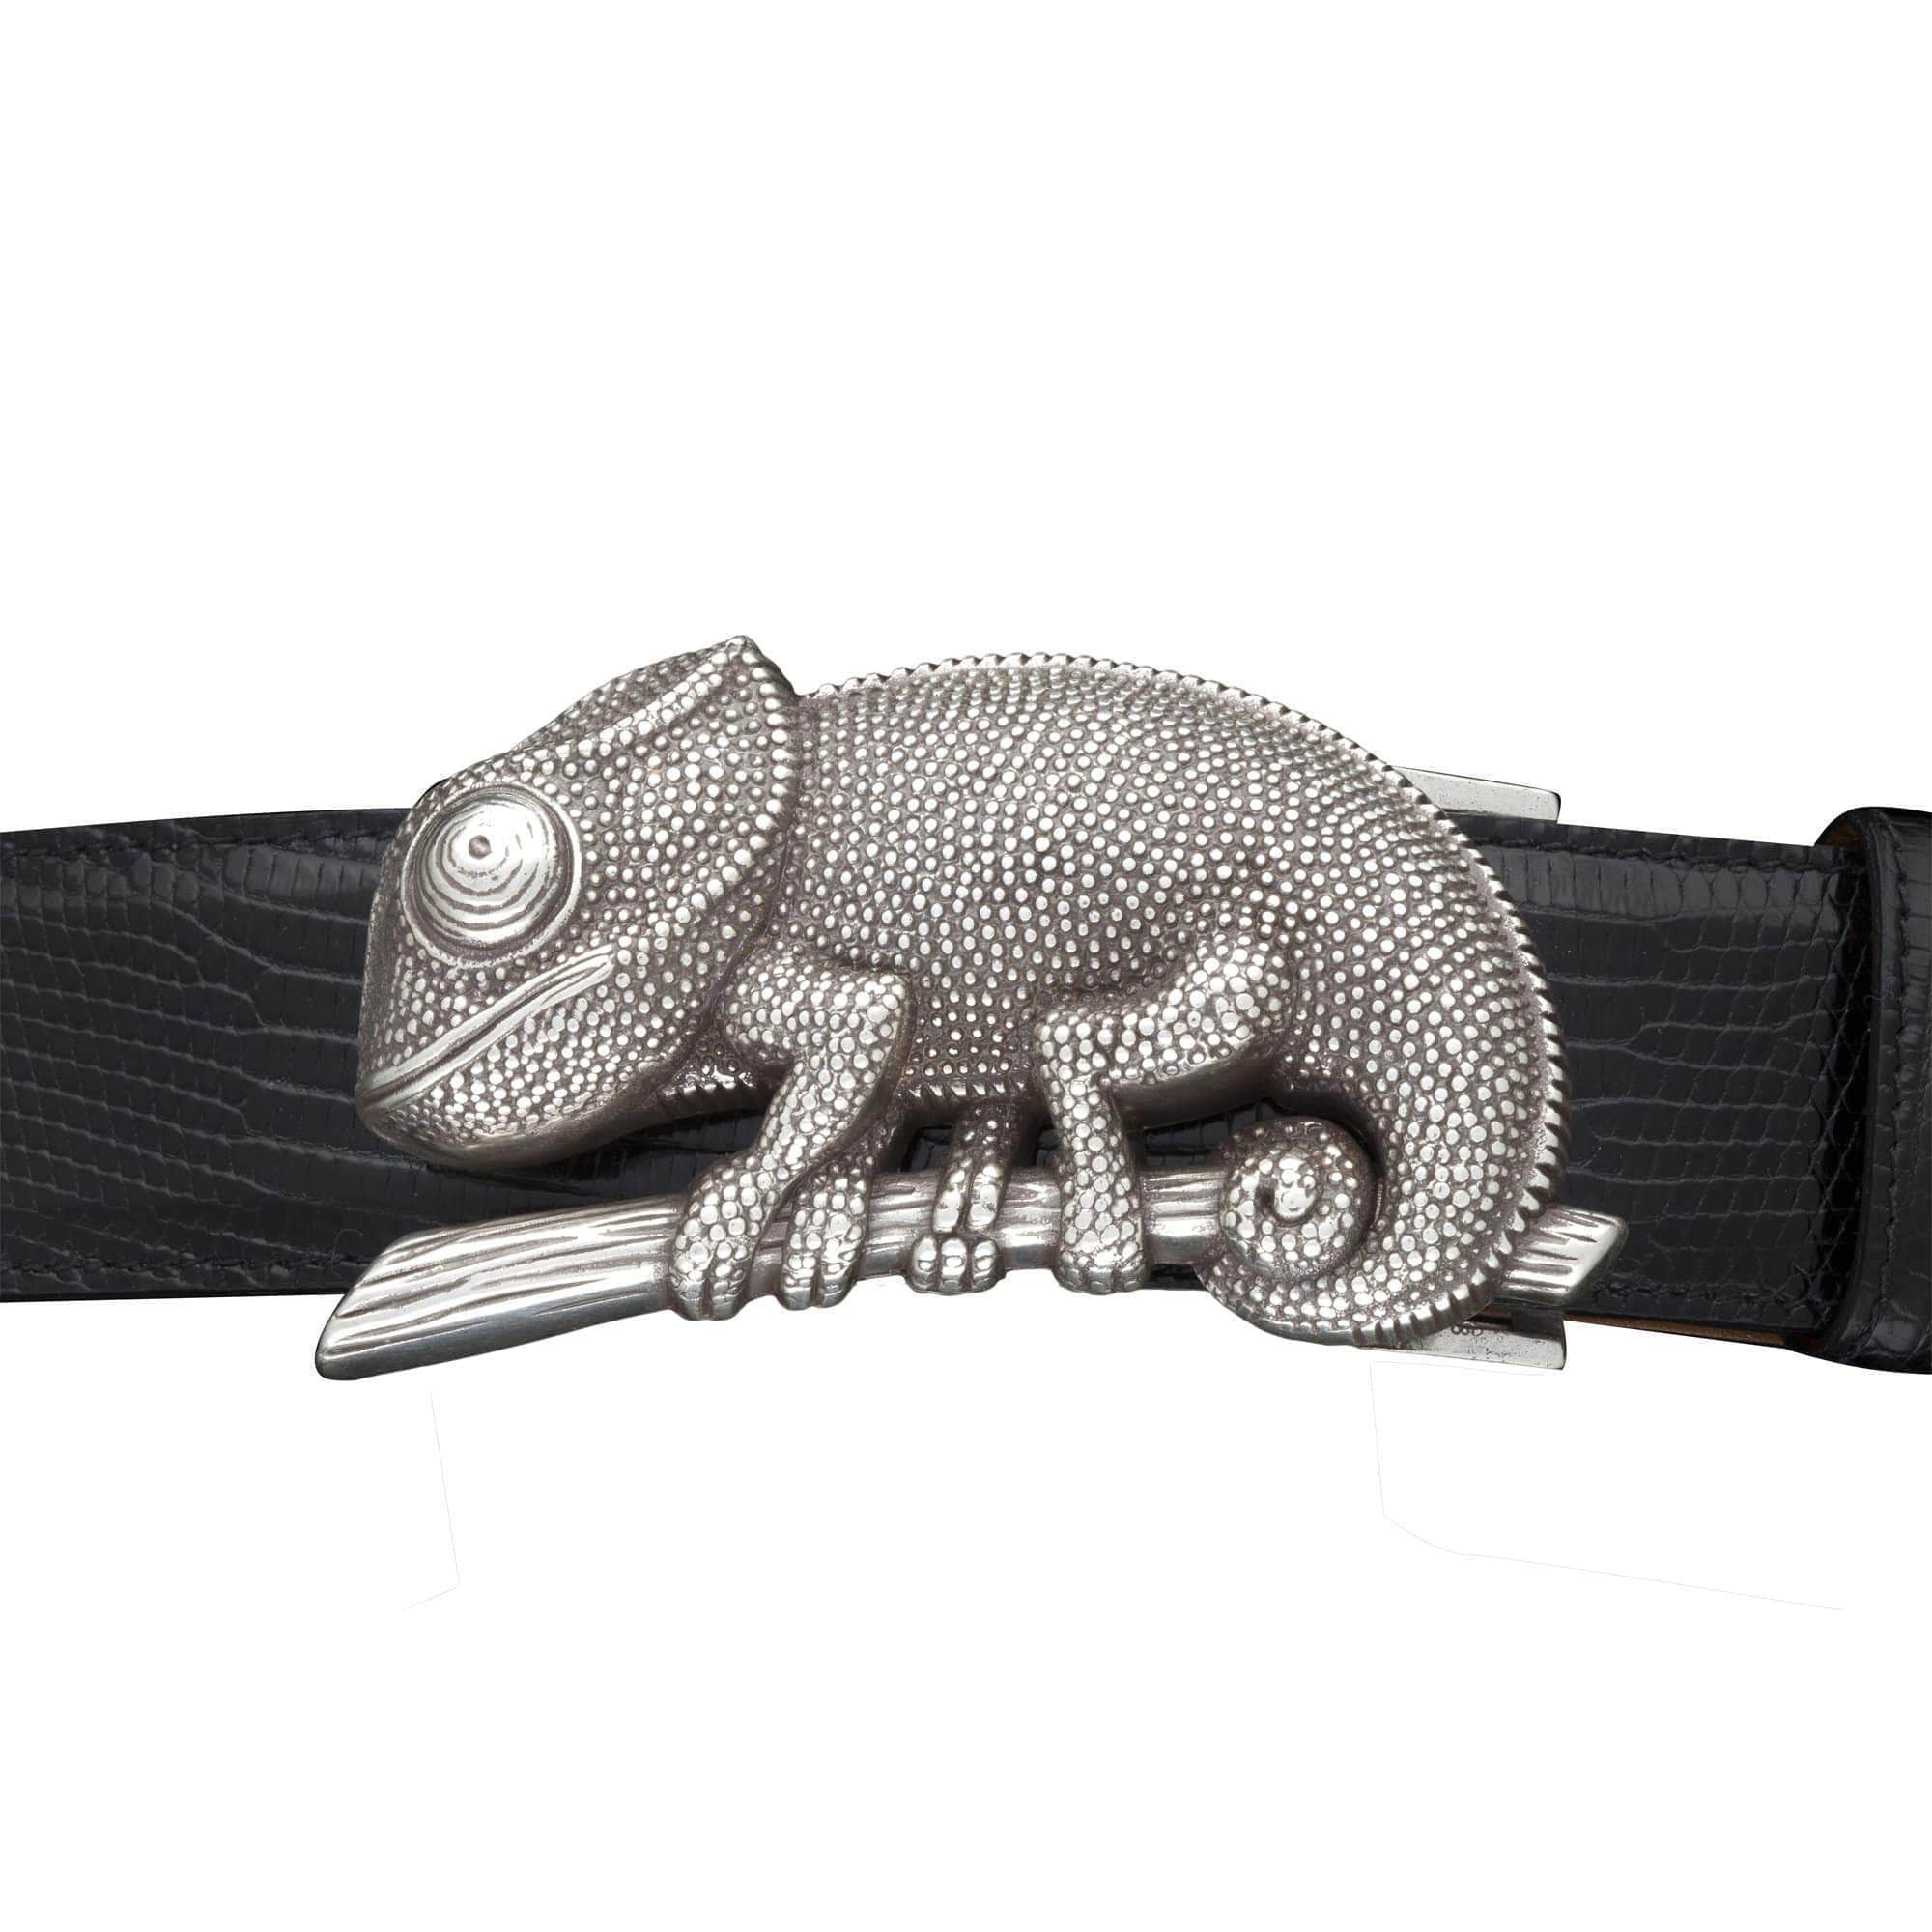 Kalifano Buckles KB40-2497AS - Kalifano Buckle 40mm Chameleon - Antique Silver KB40-2497AS